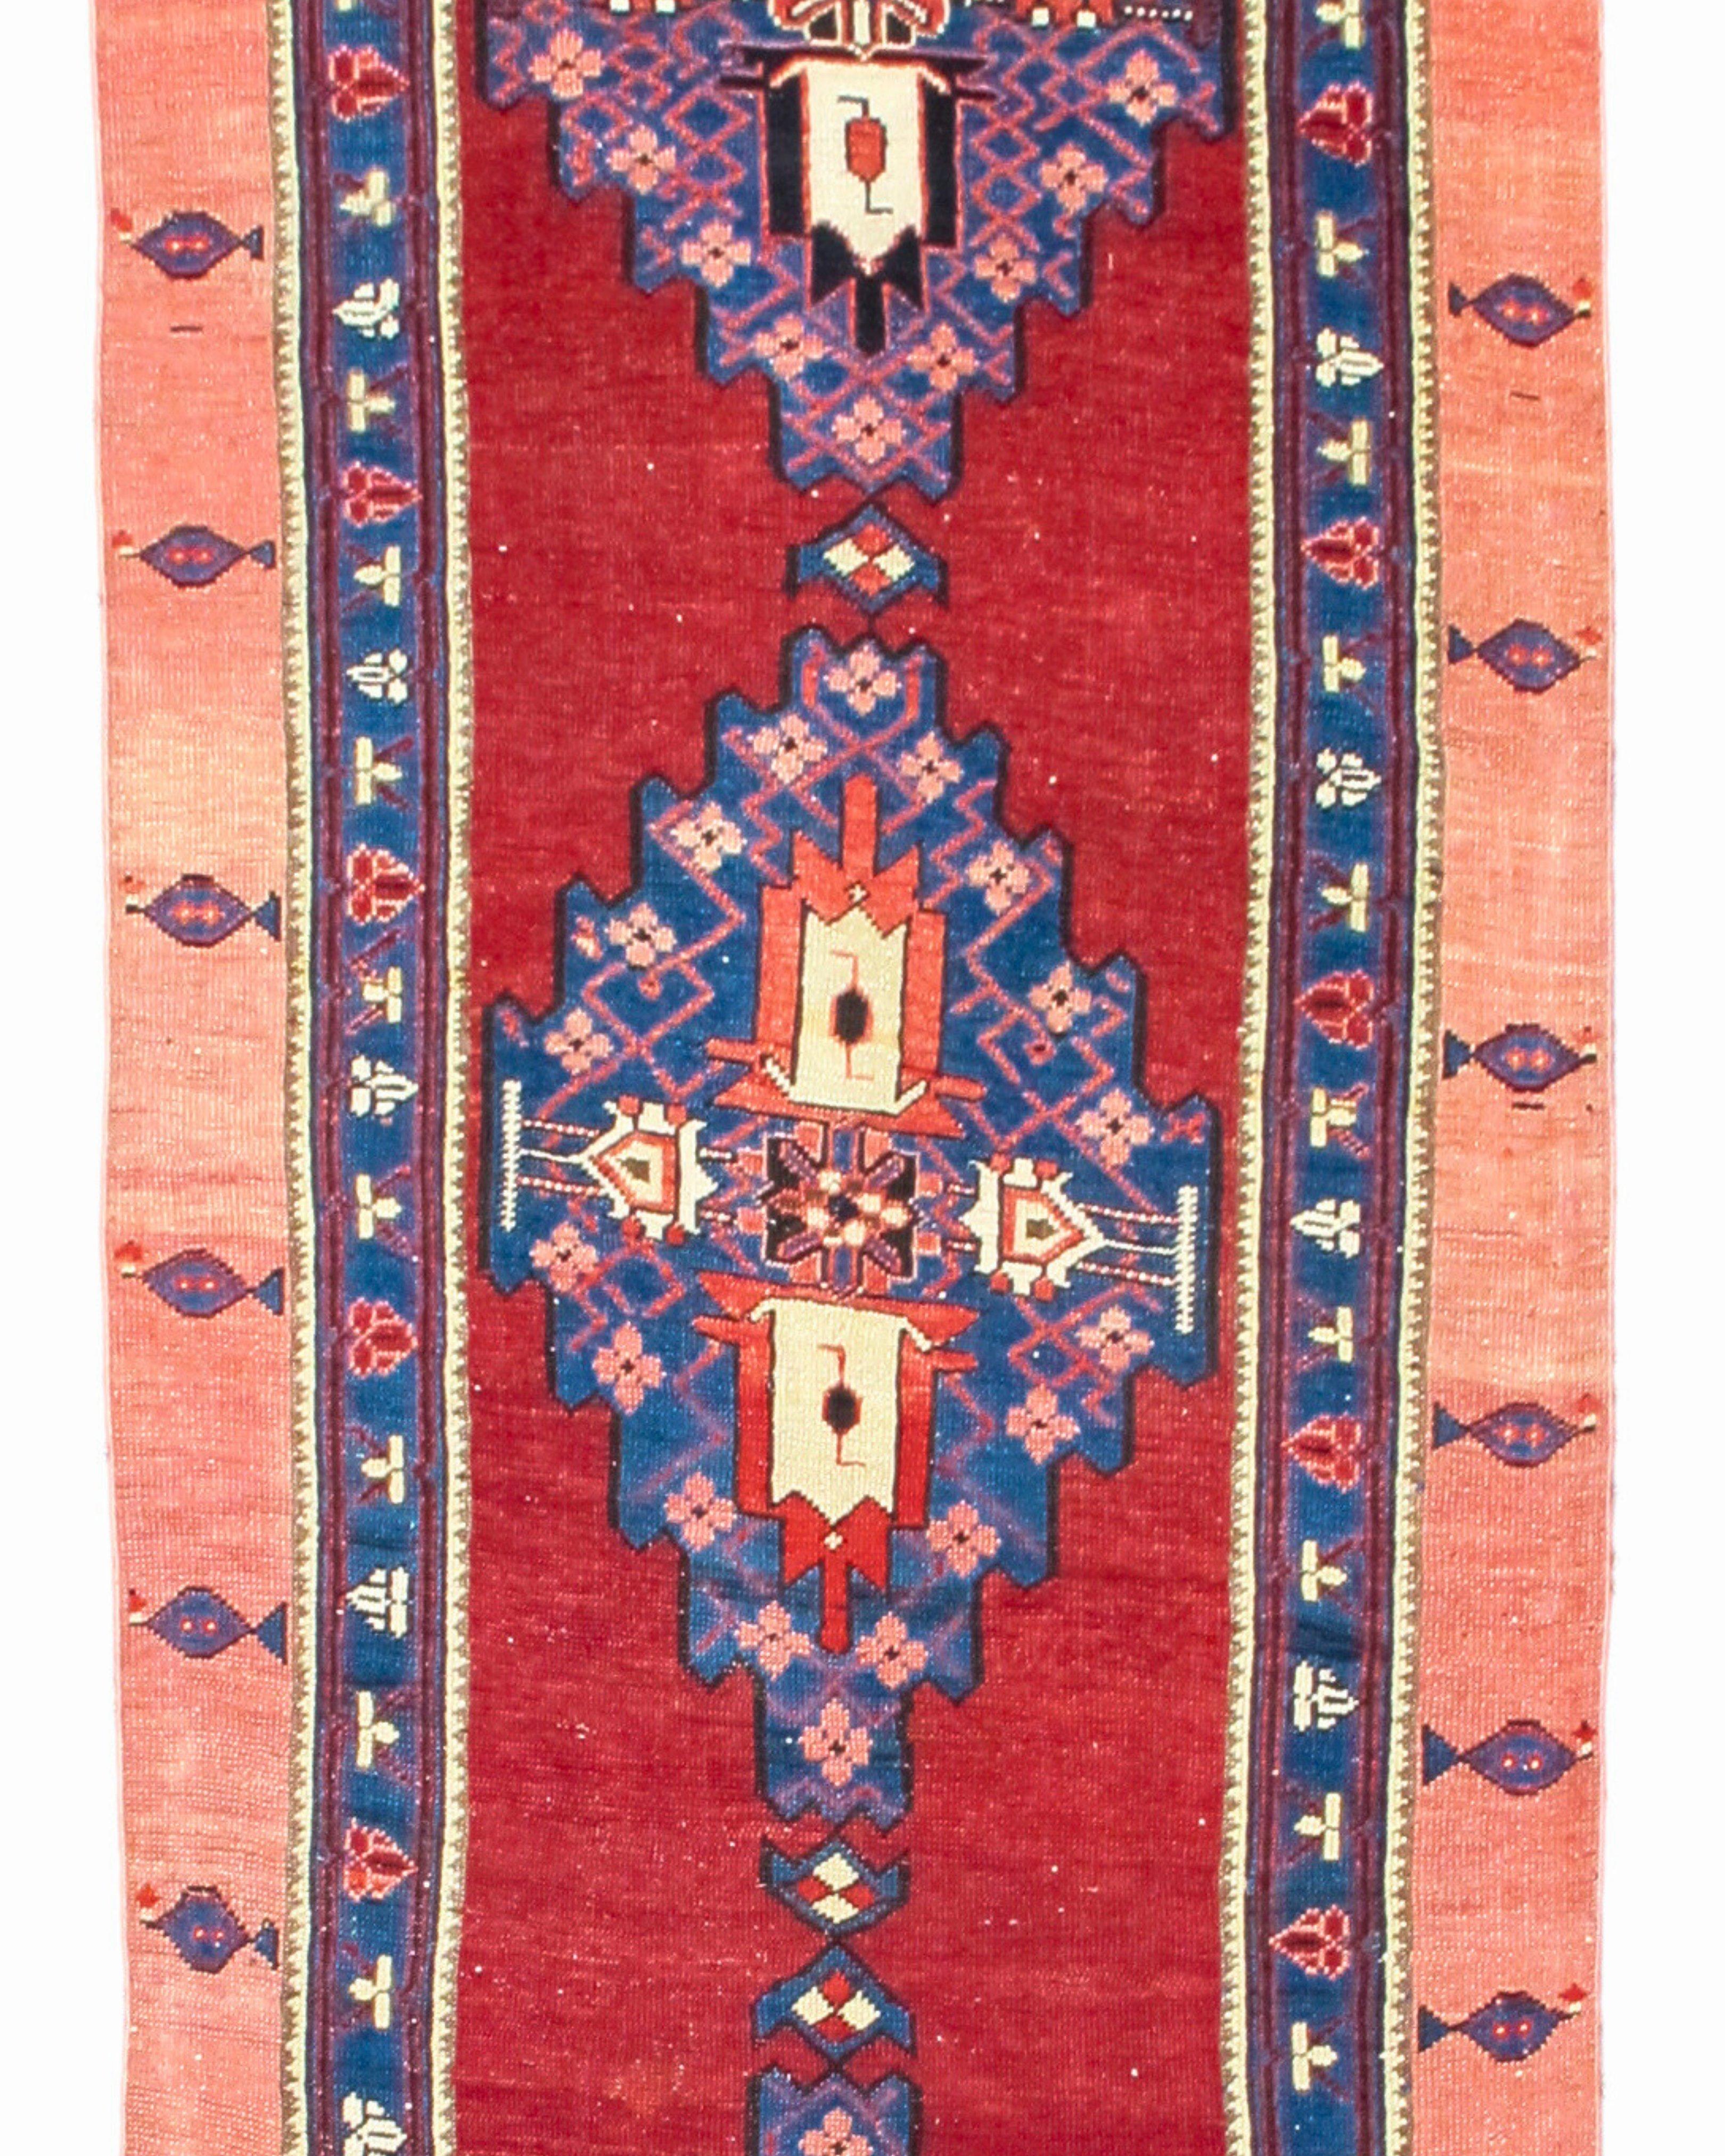 Hand-Woven Antique Persian Serab Runner, c. 1900 For Sale